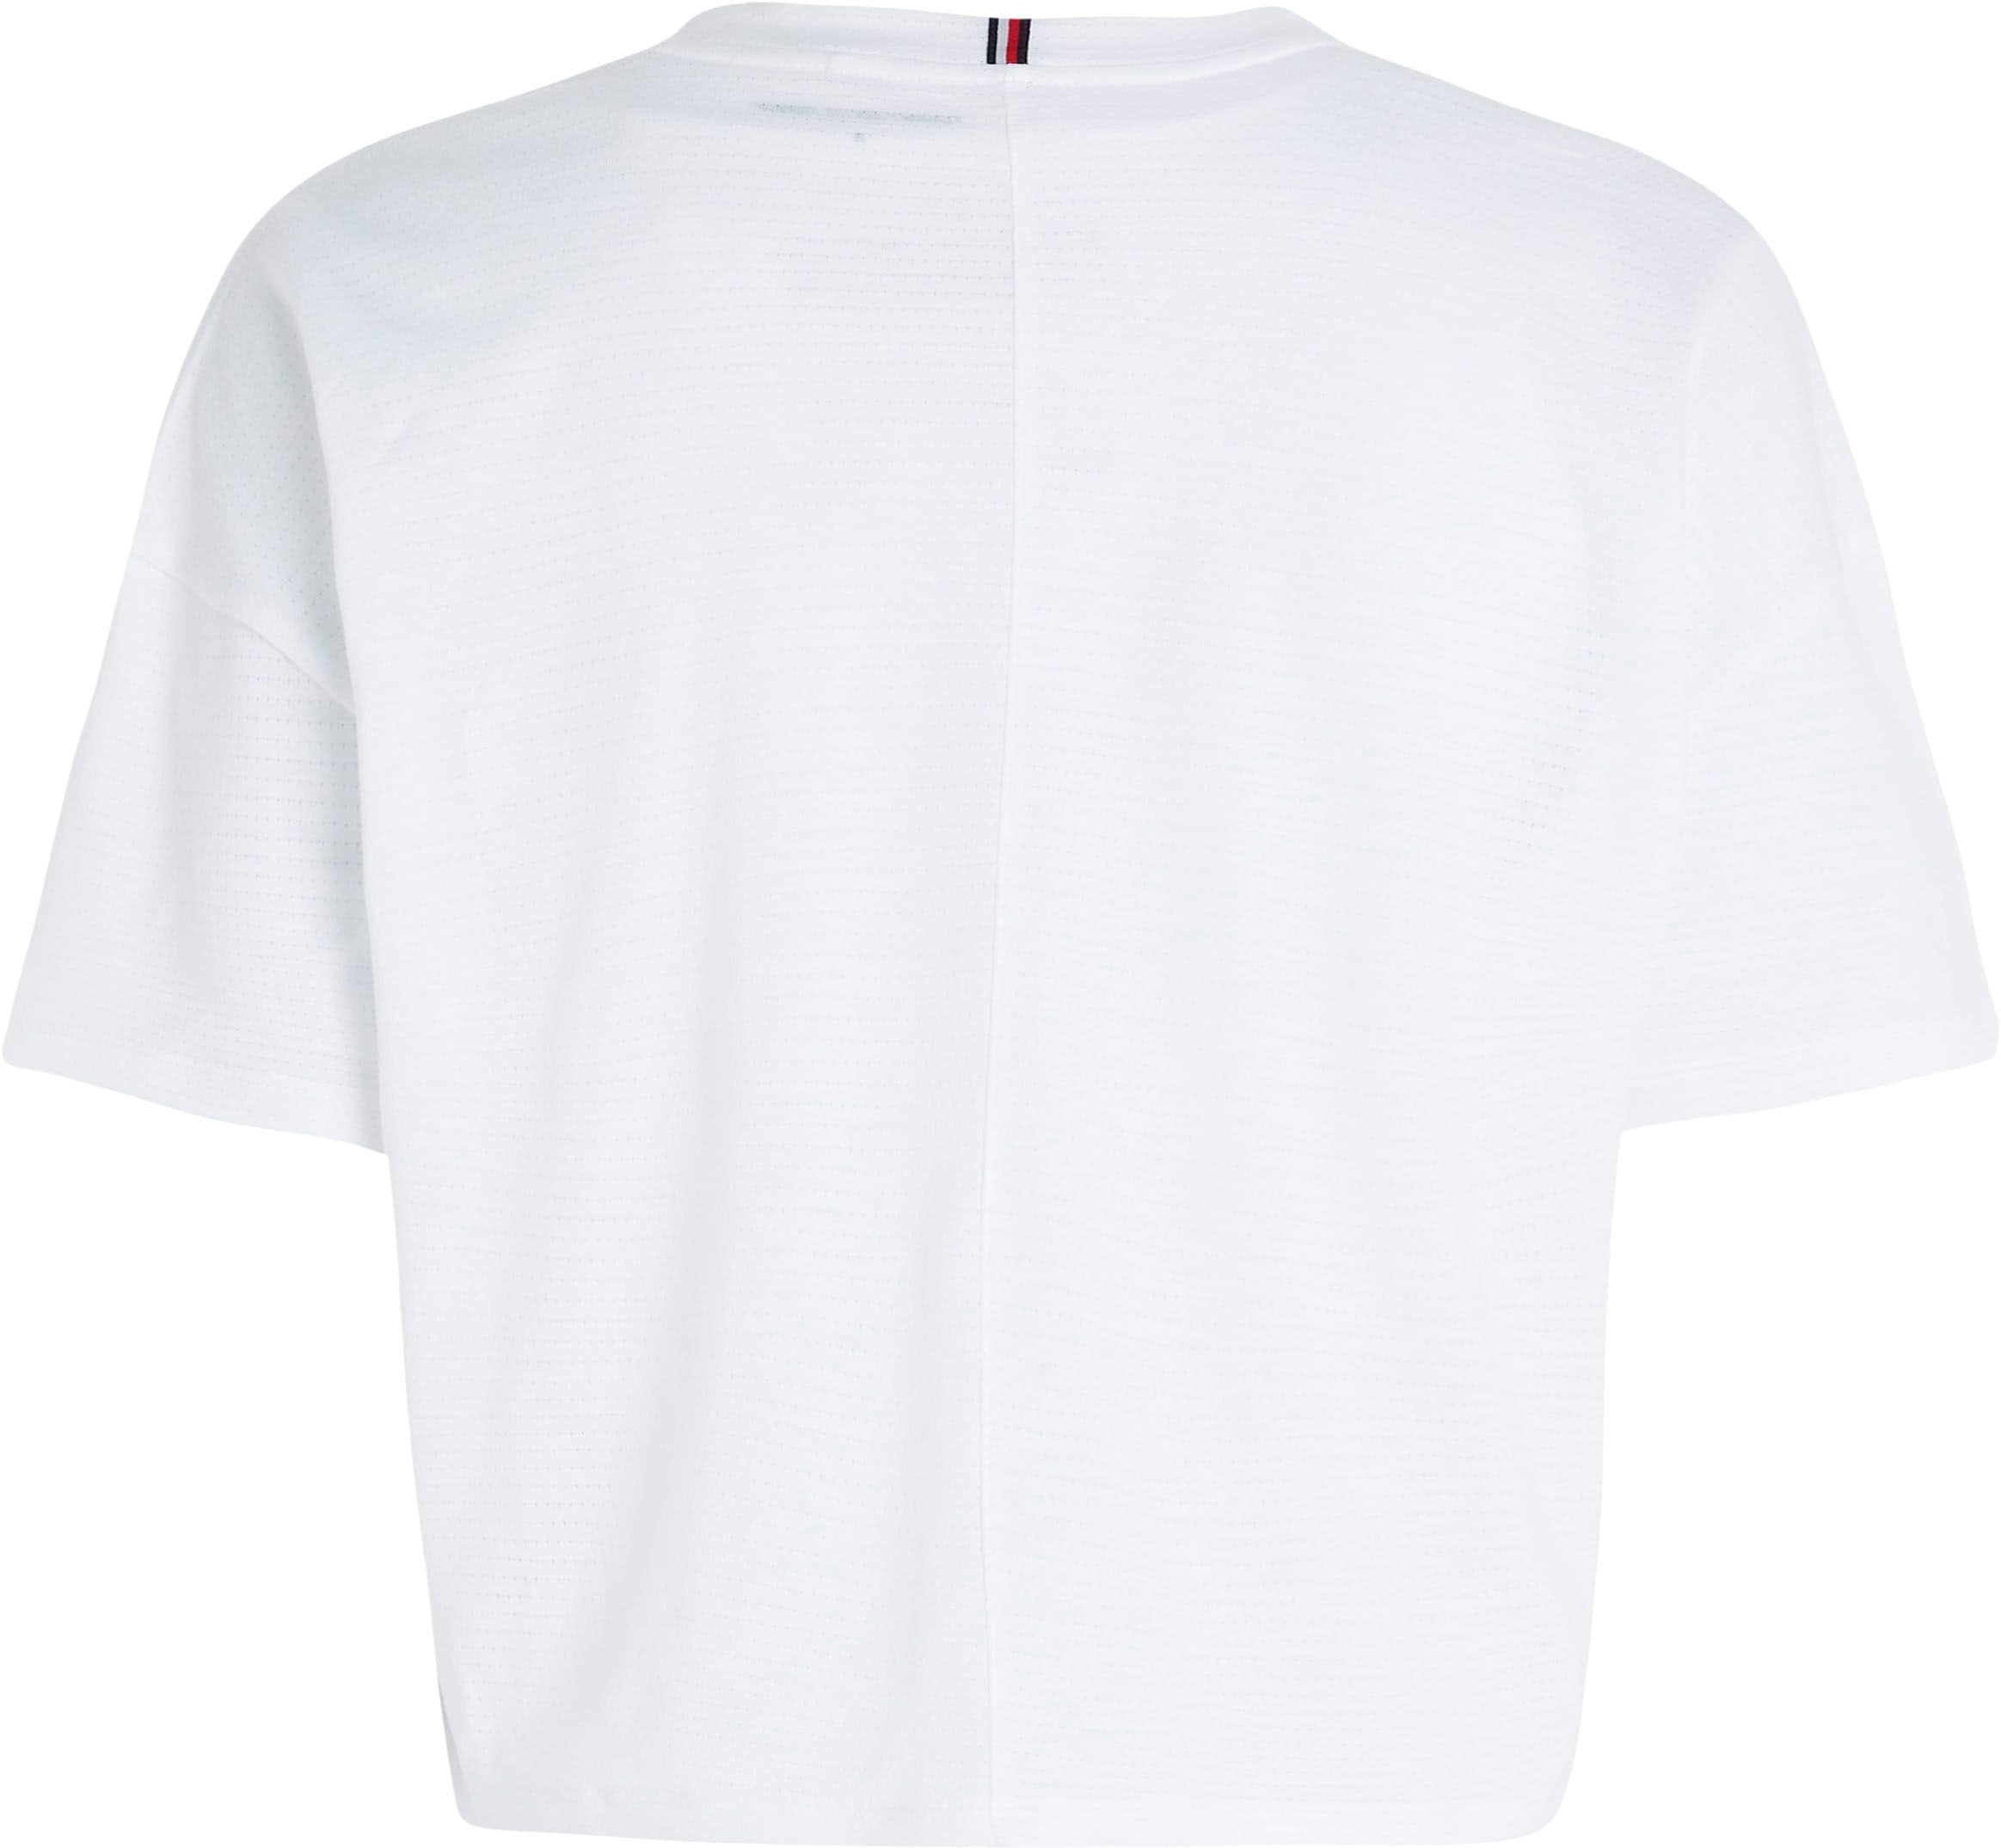 Tommy Hilfiger Sport modischer TEE«, RELAXED online CROPPED »ESSENTIALS bei in cropped Form T-Shirt